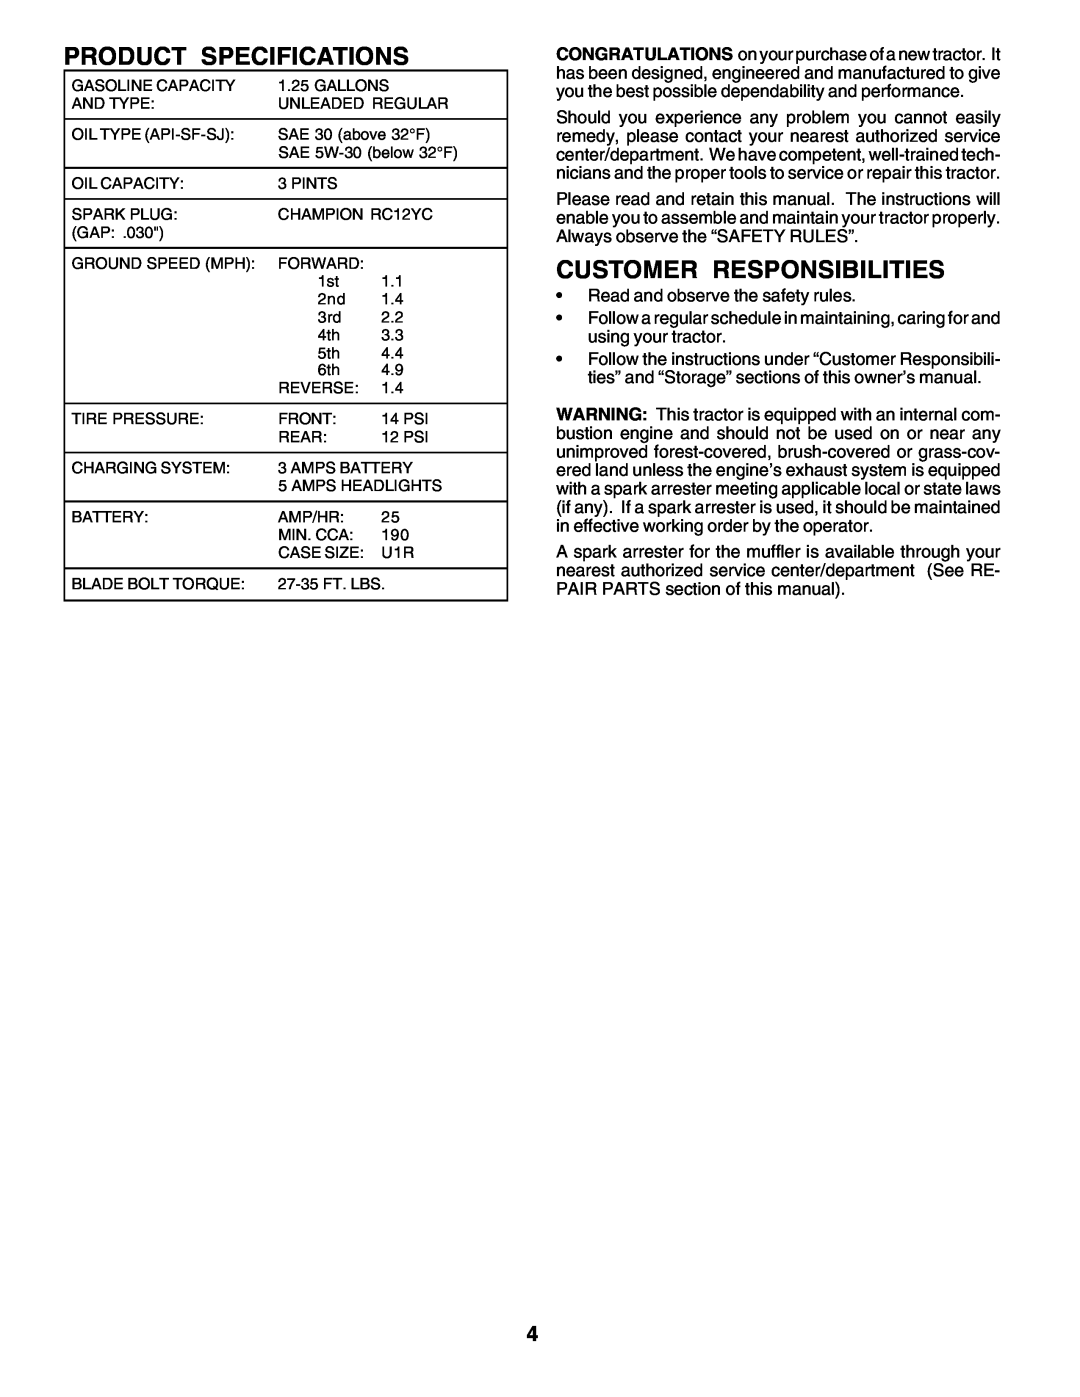 Poulan 179416 manual Product Specifications, Customer Responsibilities 